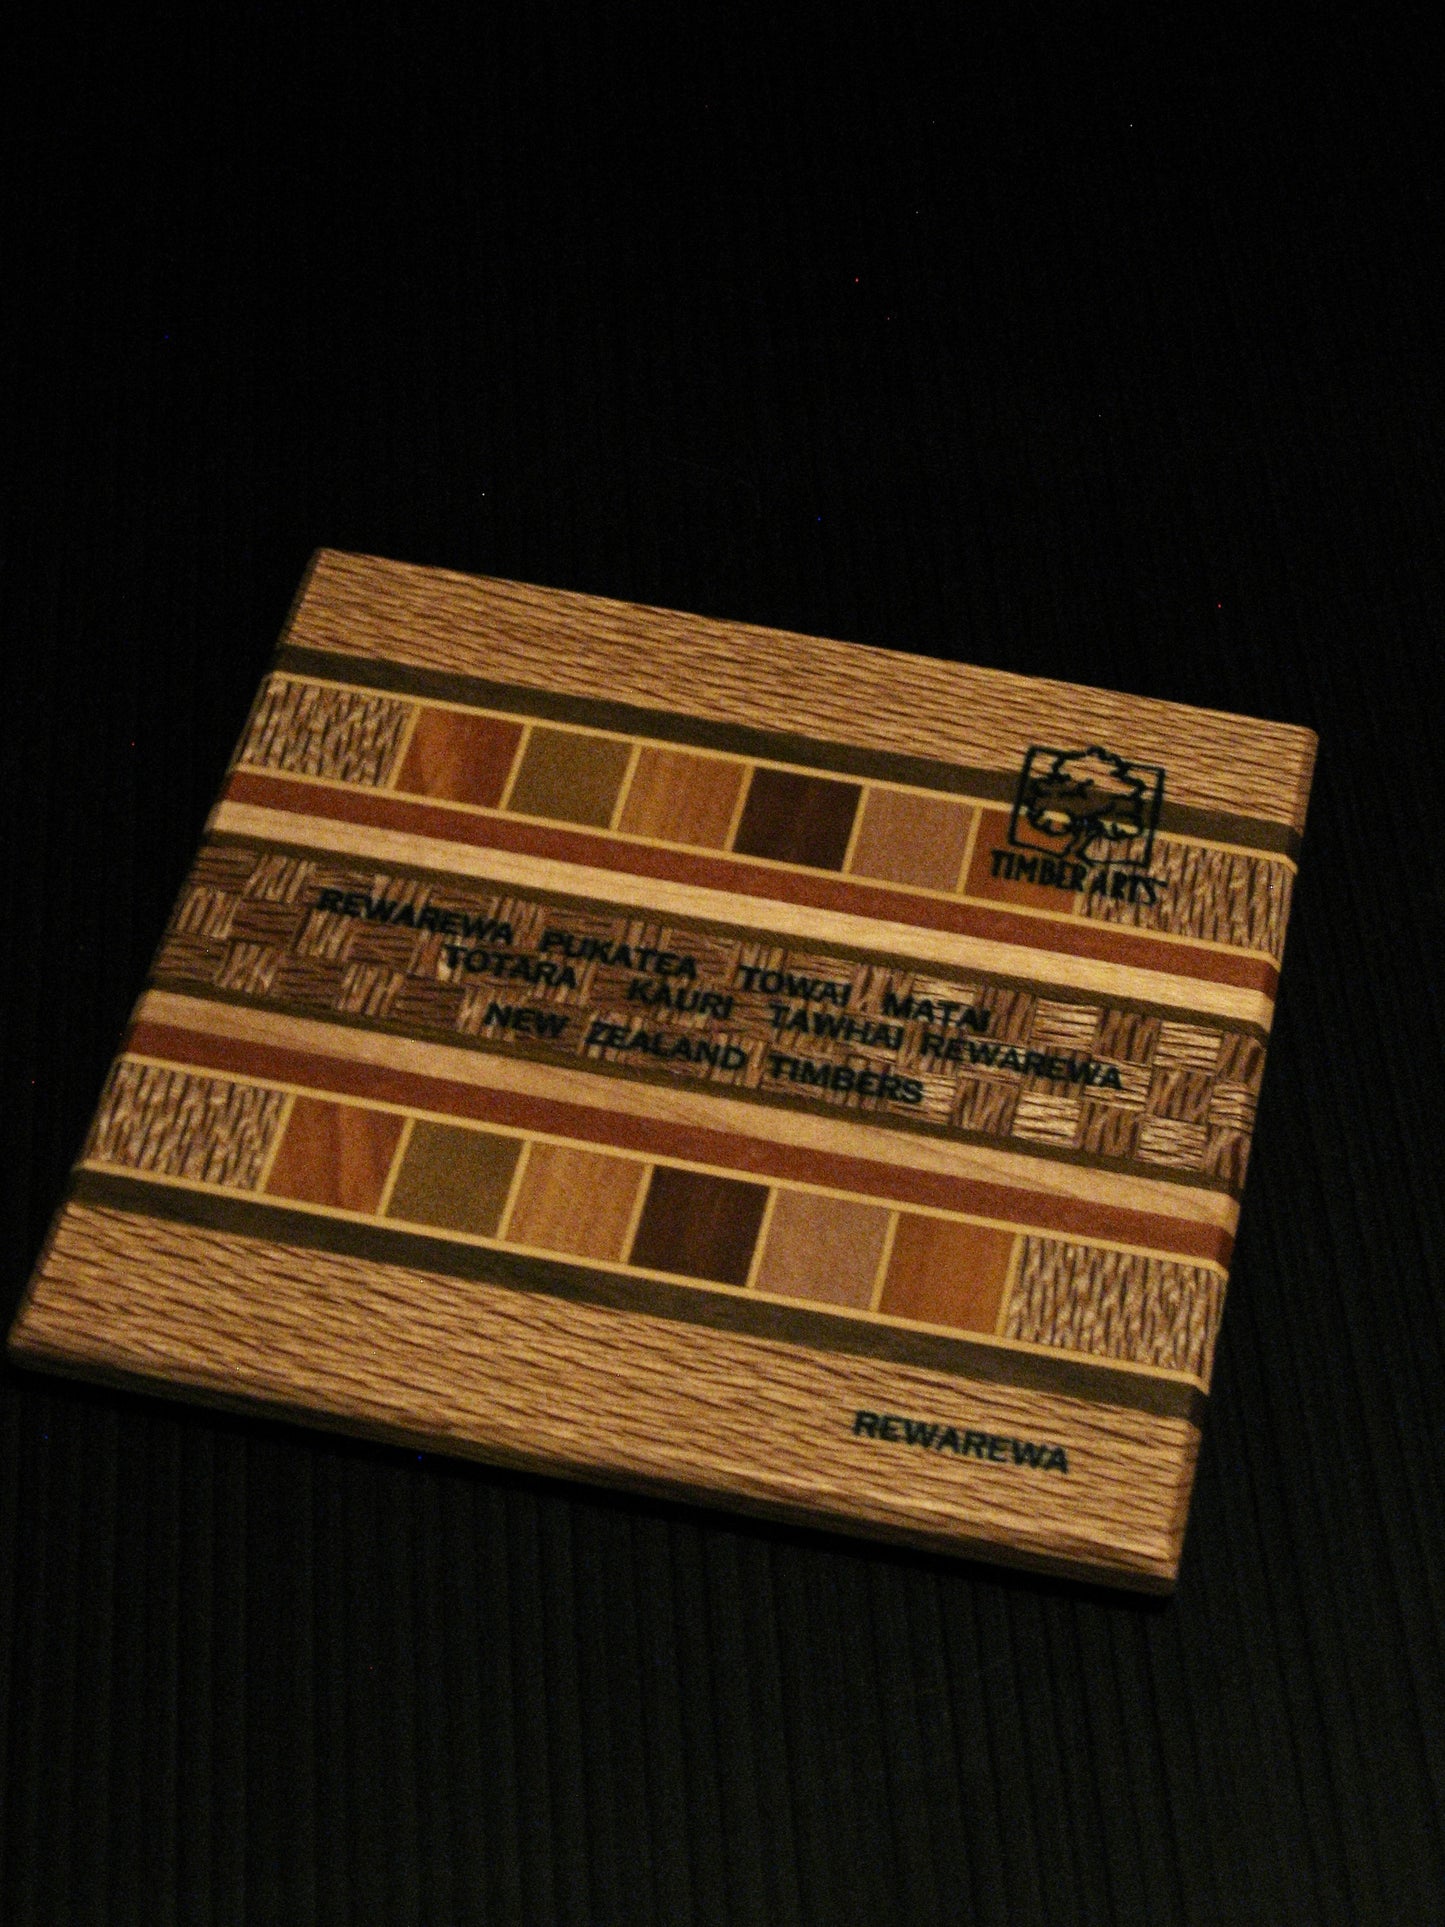 back of Coaster showing many NZ Native Timbers with rewarewa border by Timber Arts Silver Fern Gallery